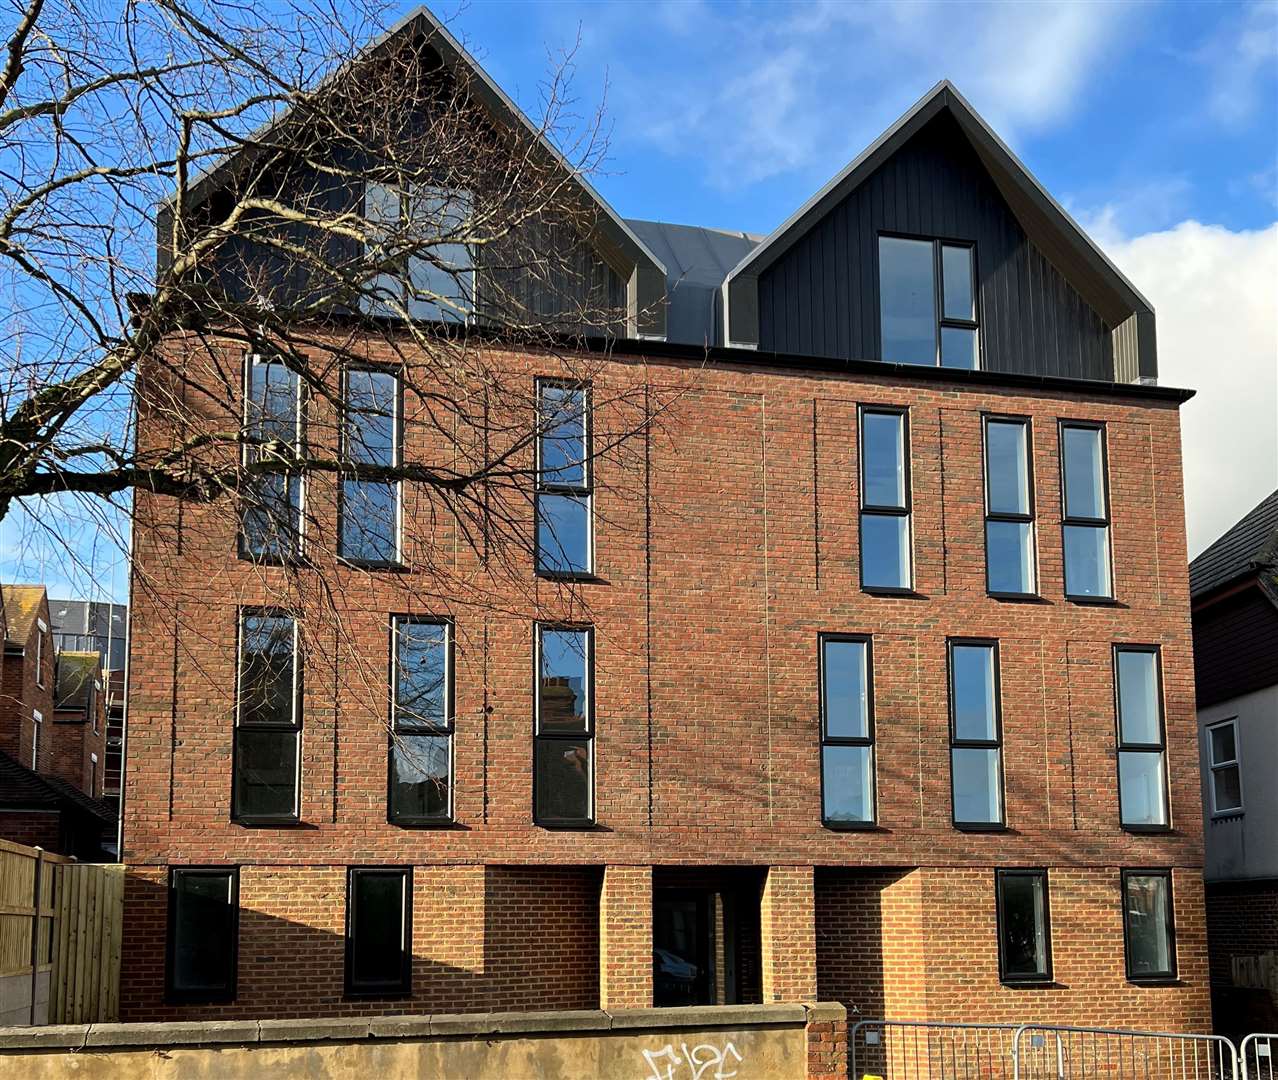 Fourtnee new homes have been built in Radnor Park Road, Folkestone. Picture: KCC